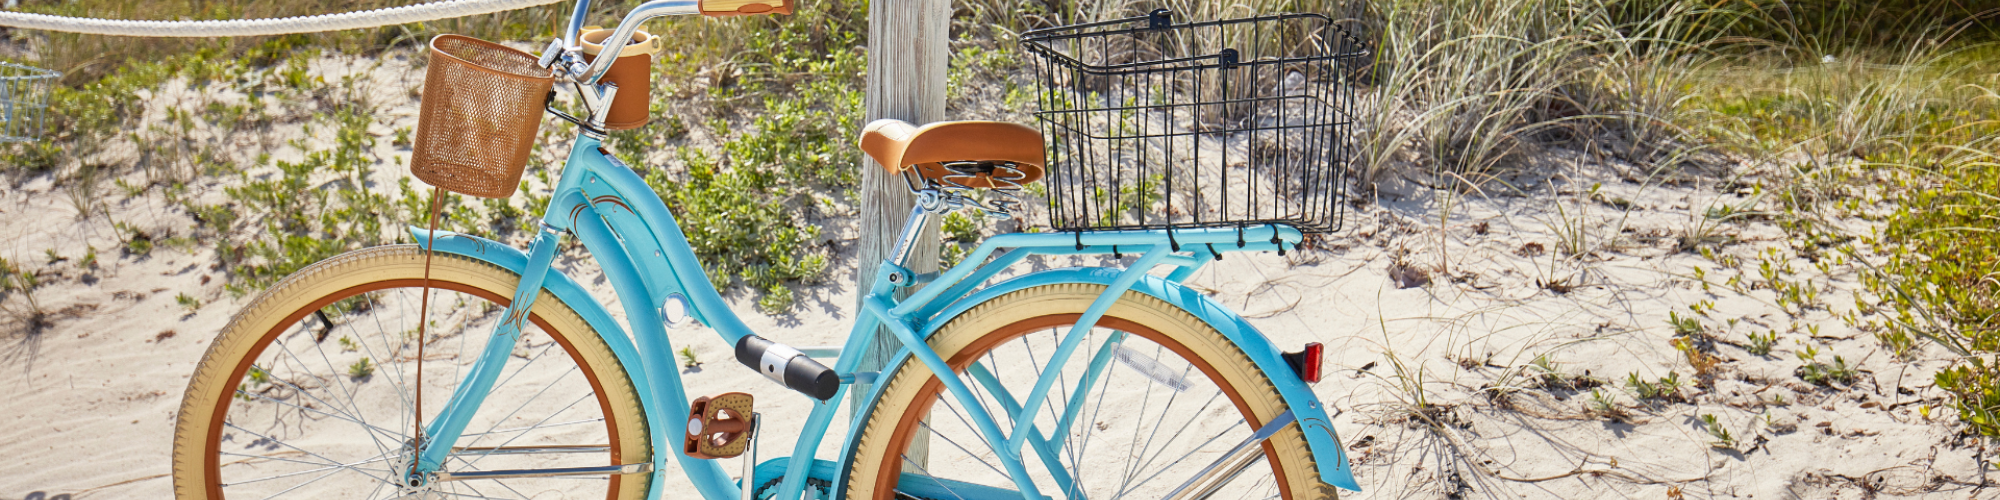 A light blue bicycle with a wicker basket is parked against a wooden post on a sandy beach. Palm trees and greenery are in the background.